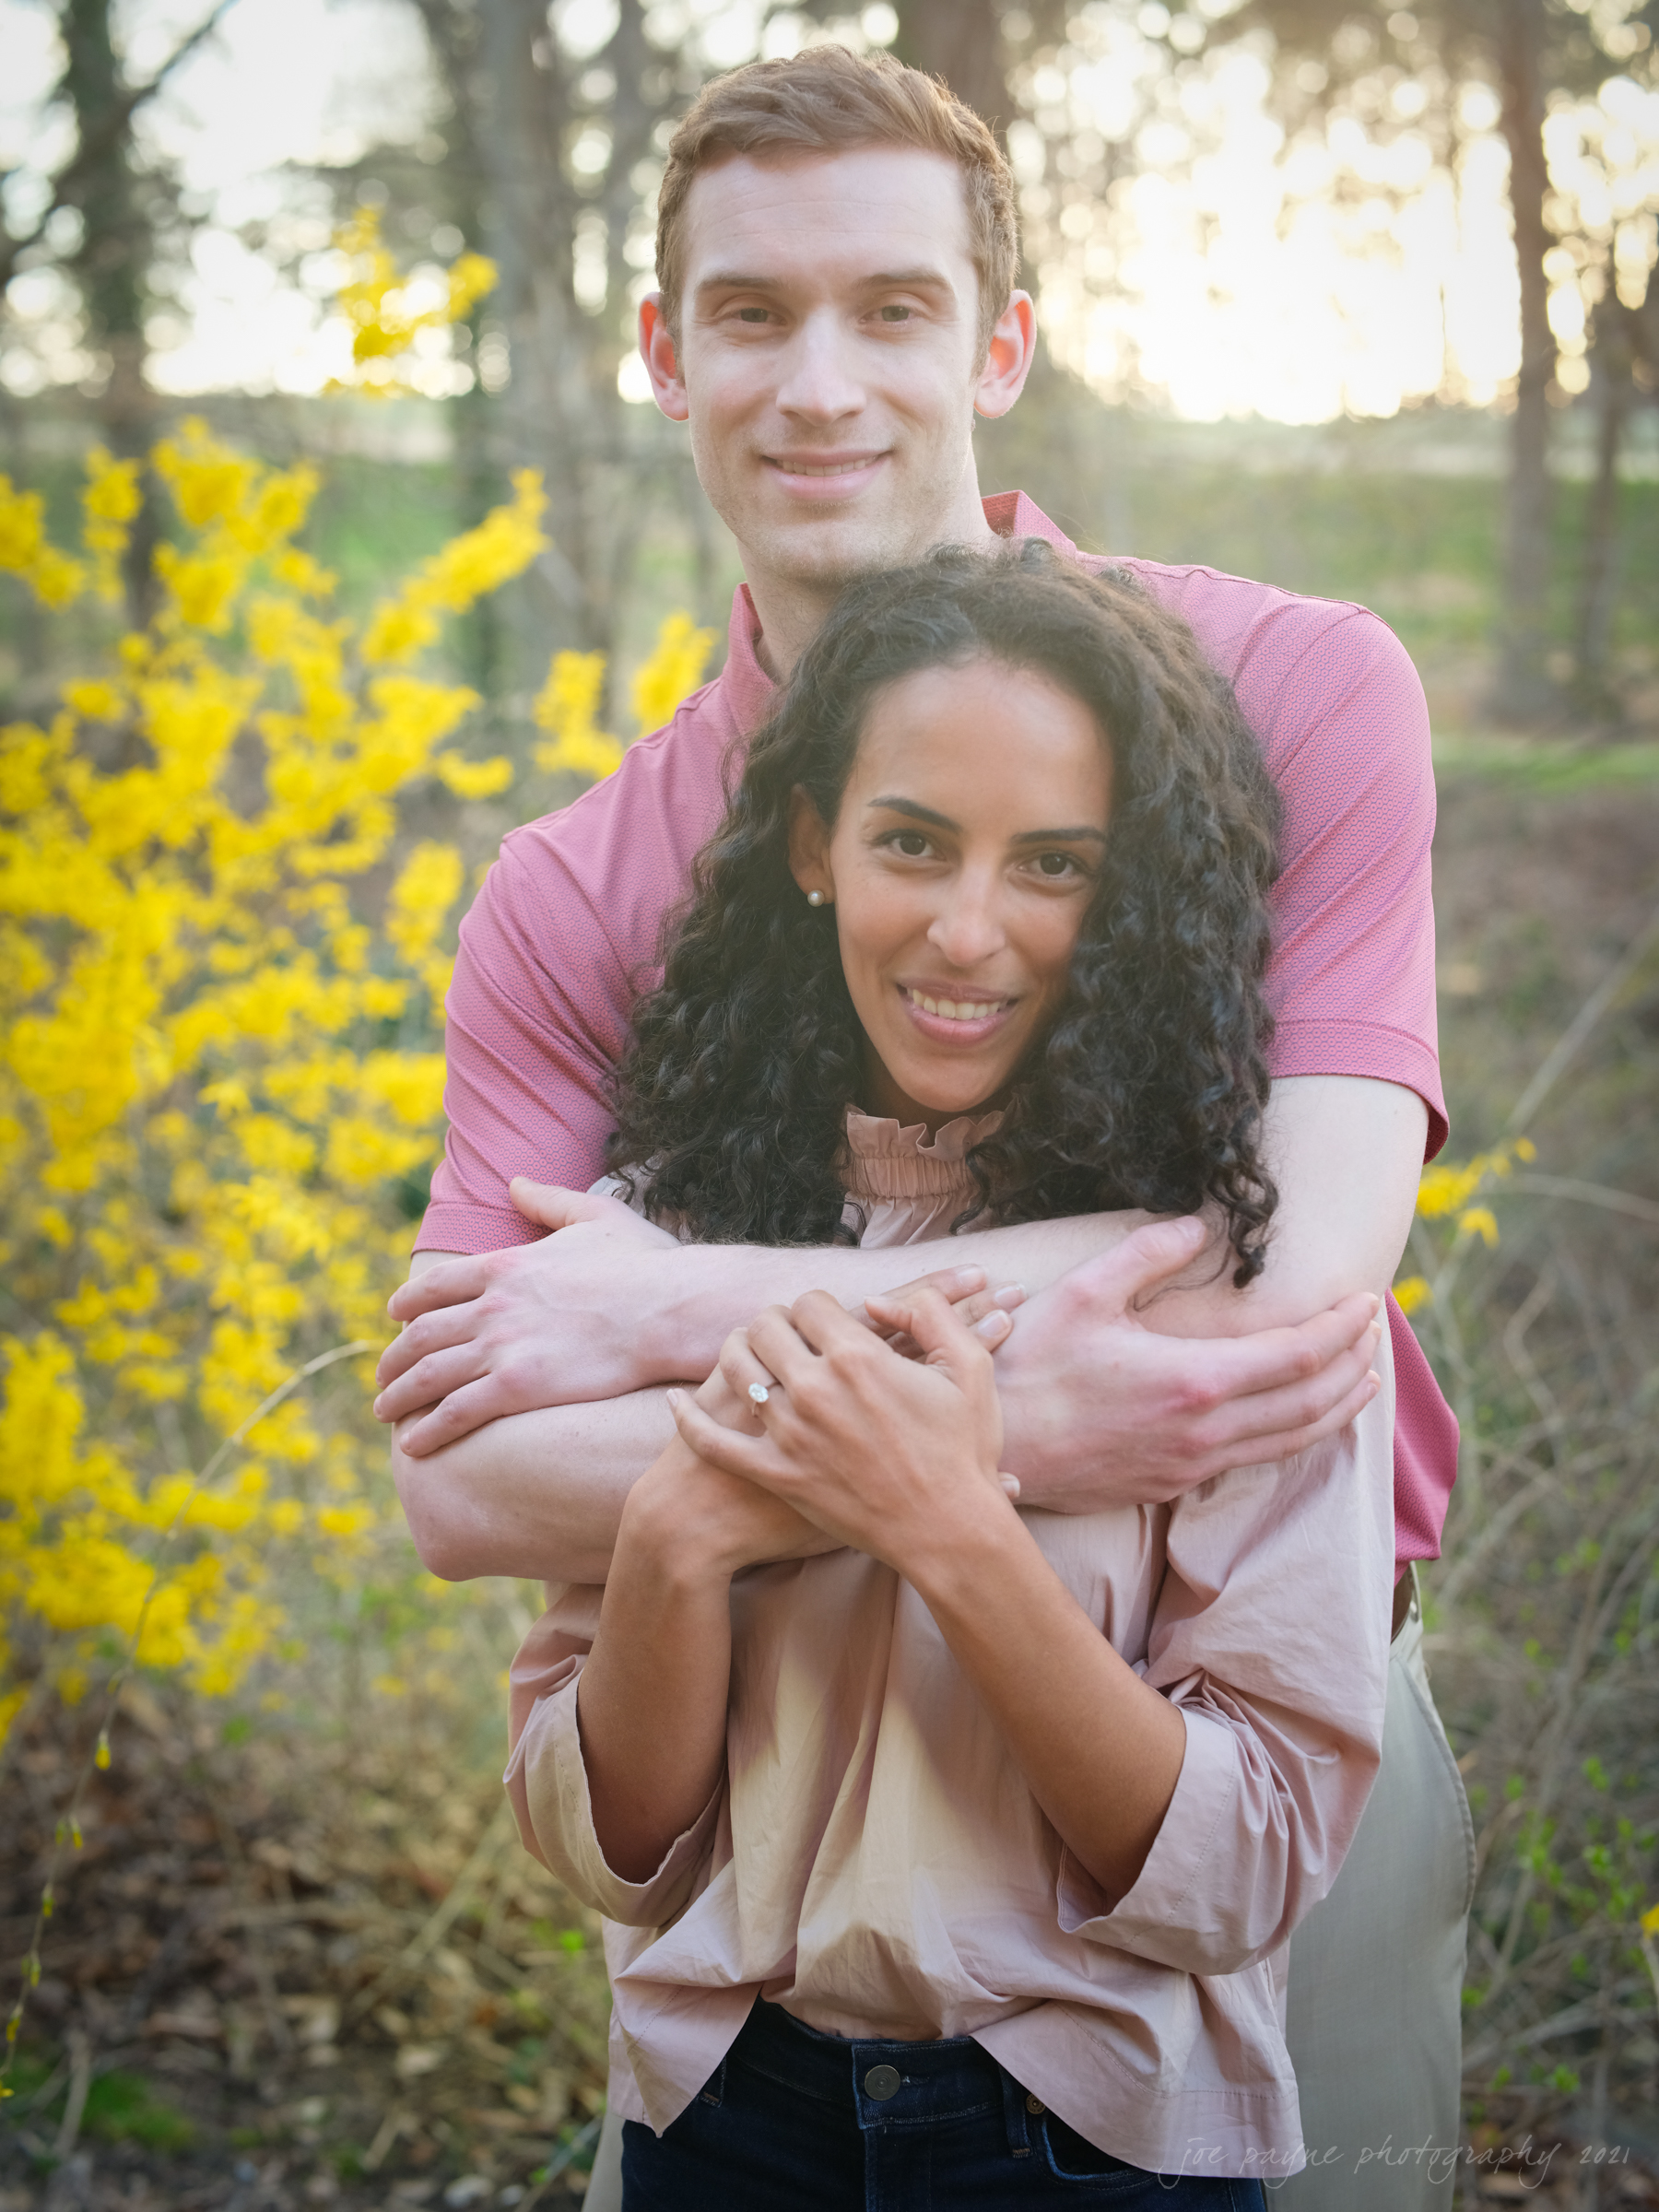 raleigh engagement photography meghan watts 22